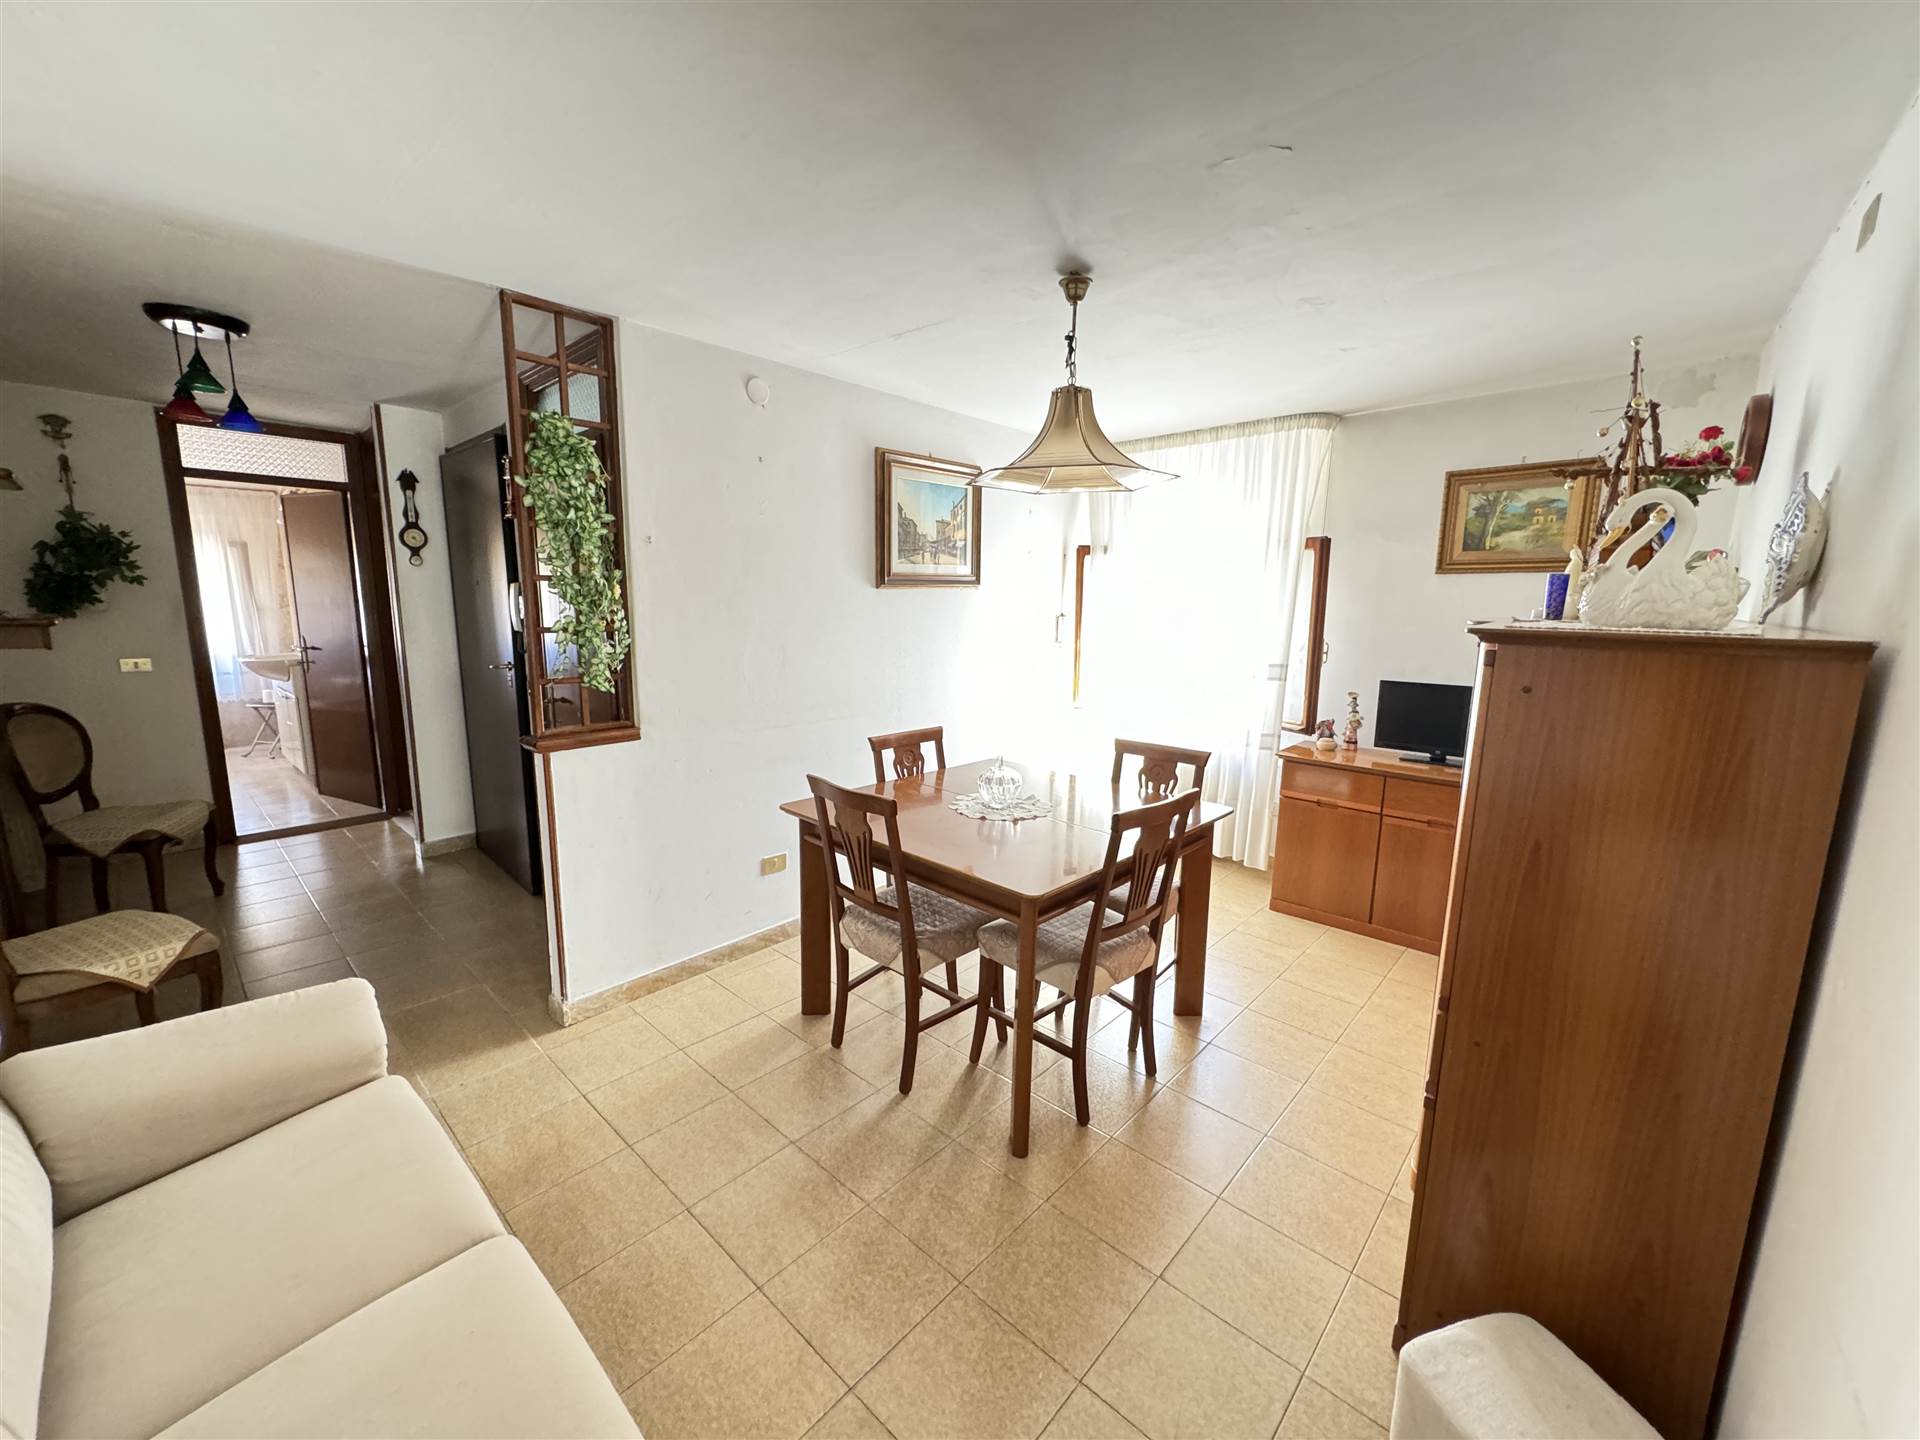 CHIOGGIA CENTRO, CHIOGGIA, Apartment for sale of 50 Sq. mt., Habitable, Heating Individual heating system, Energetic class: G, placed at 3° on 3, 